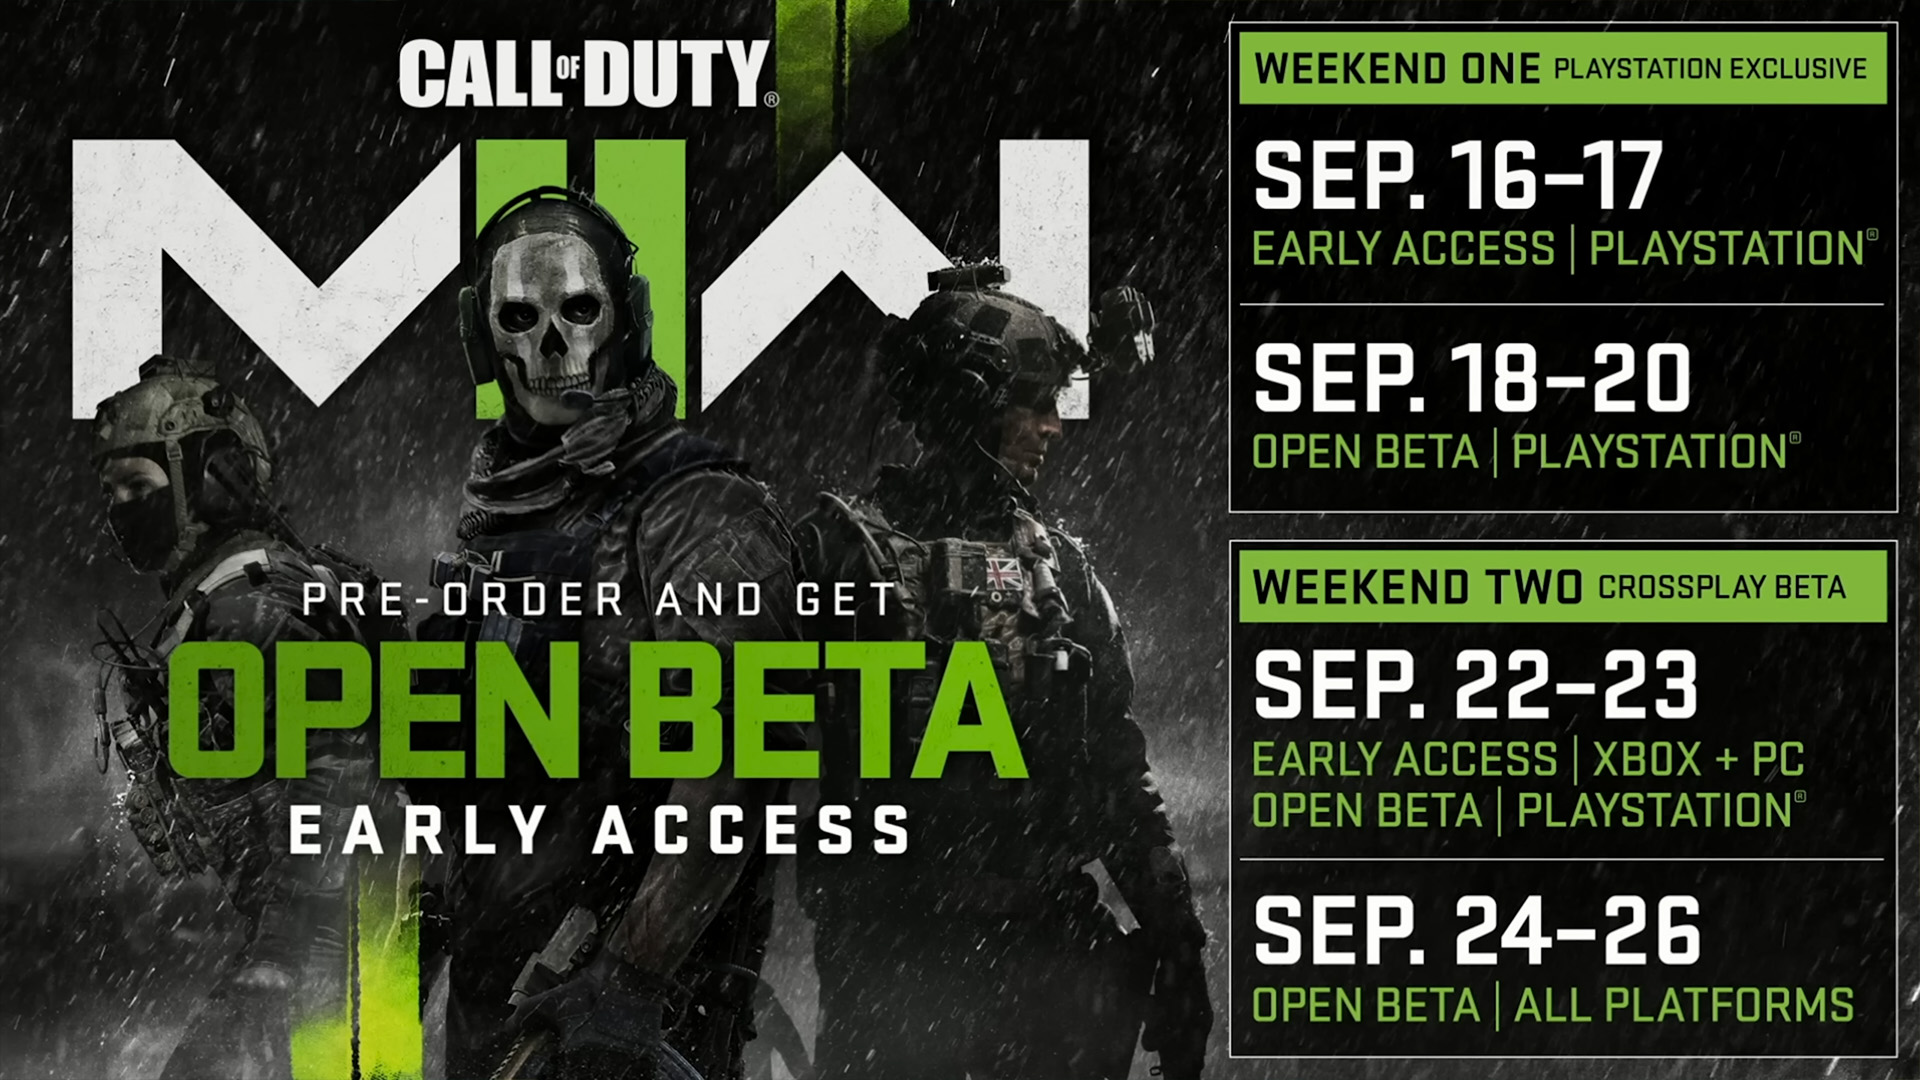 The dates of the Modern Warfare 2 open beta in September 2022